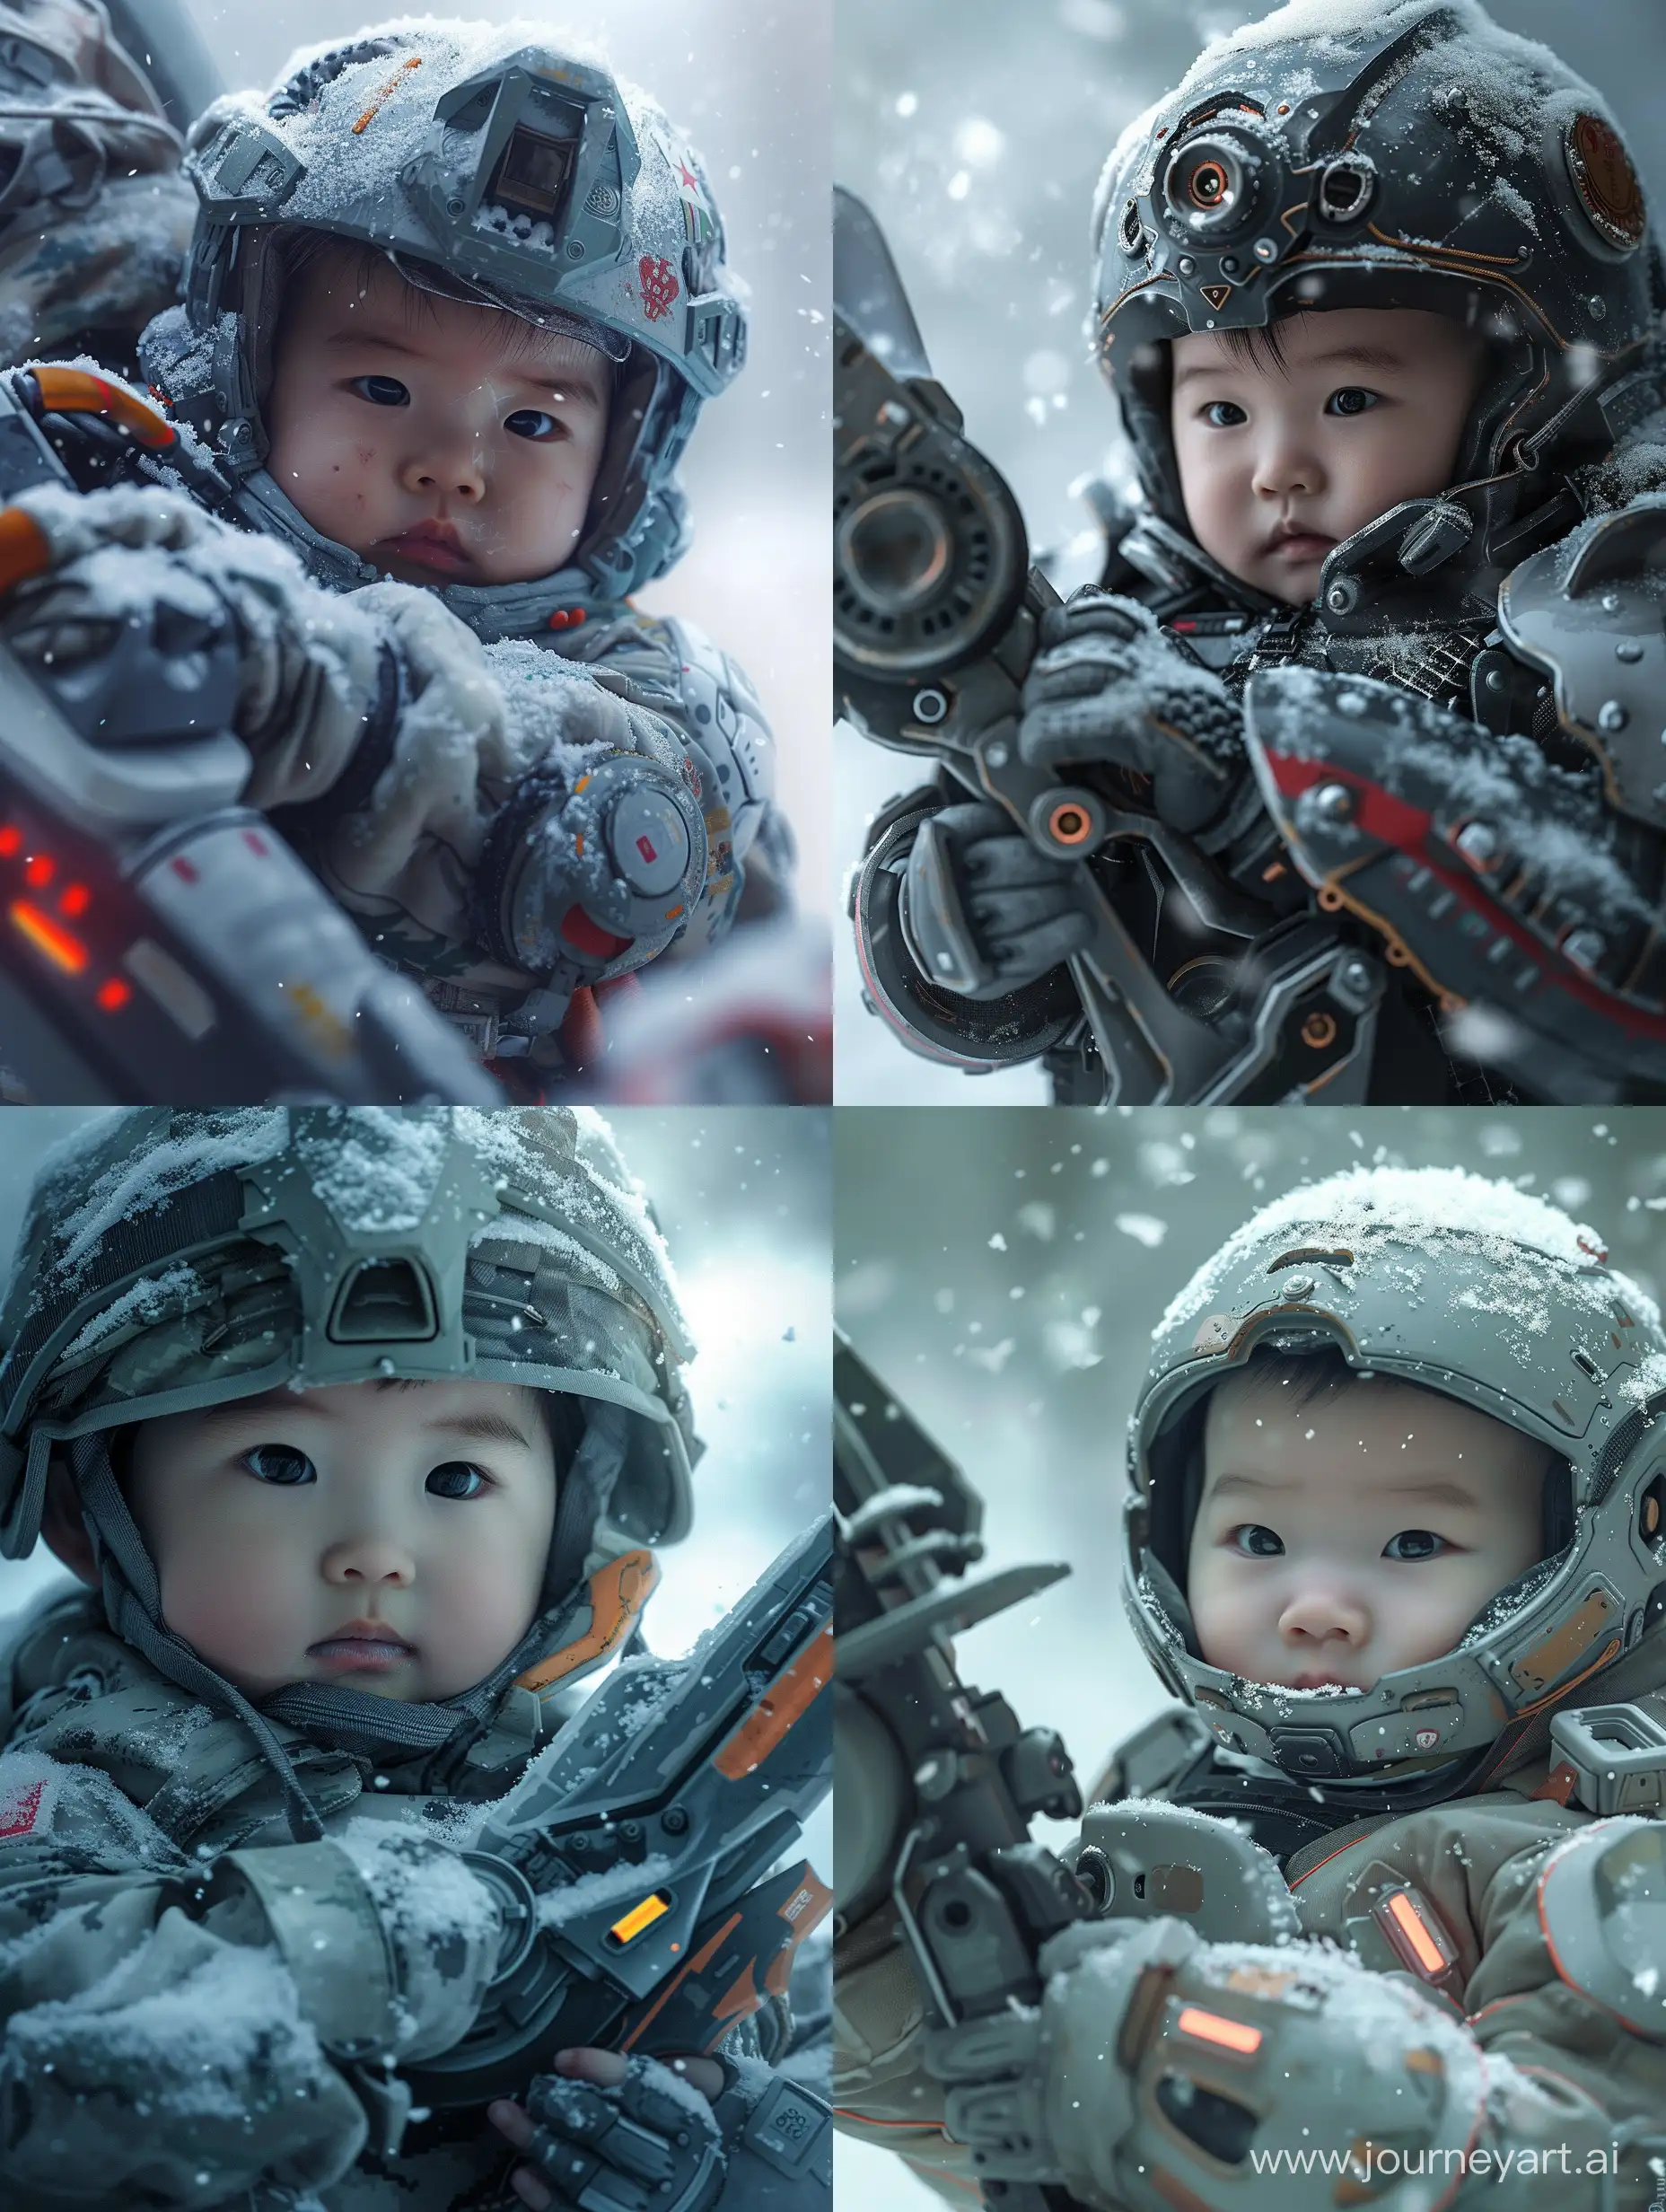 Adorable-Baby-in-Chinese-Special-Forces-Uniform-with-Futuristic-Weapon-in-Snowy-Wonderland